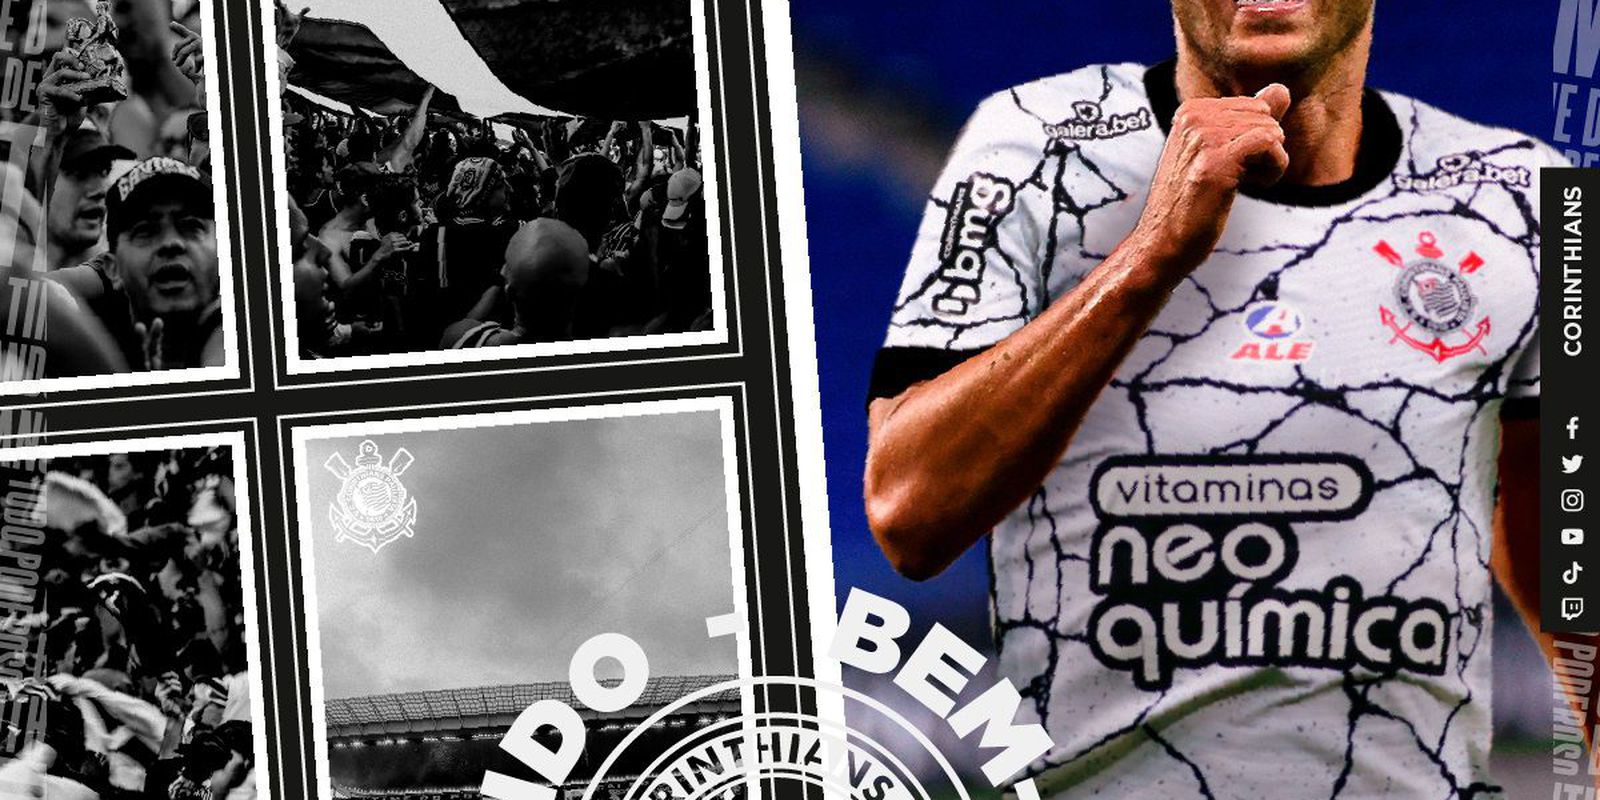 After fleeing Ukraine, Júnior Moraes is hired by Corinthians